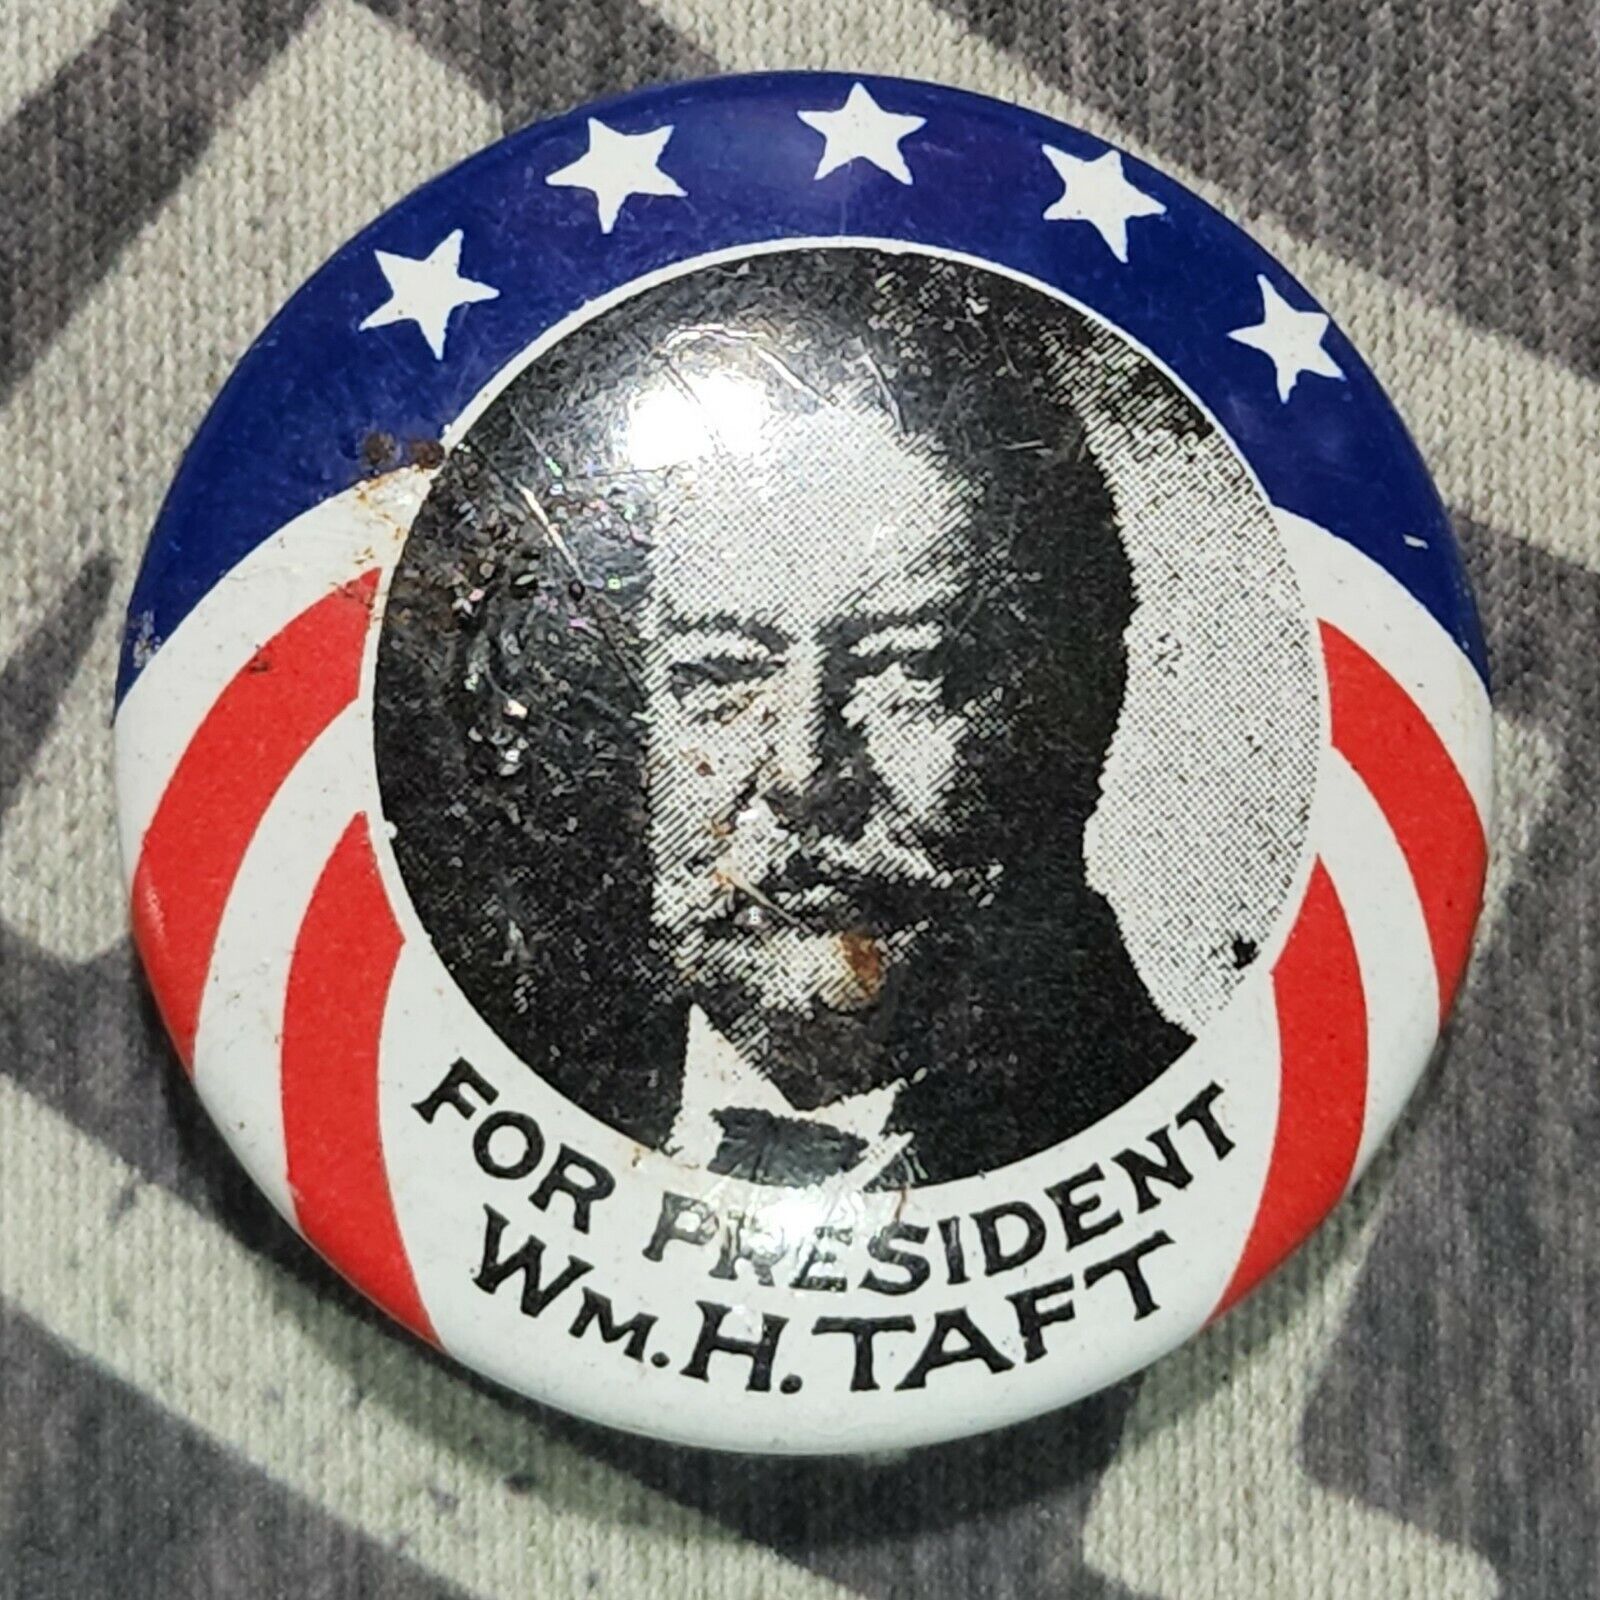 Vintage Wm. H. Taft for President Campaign Button Kleenex Tissue 68 Reproduction